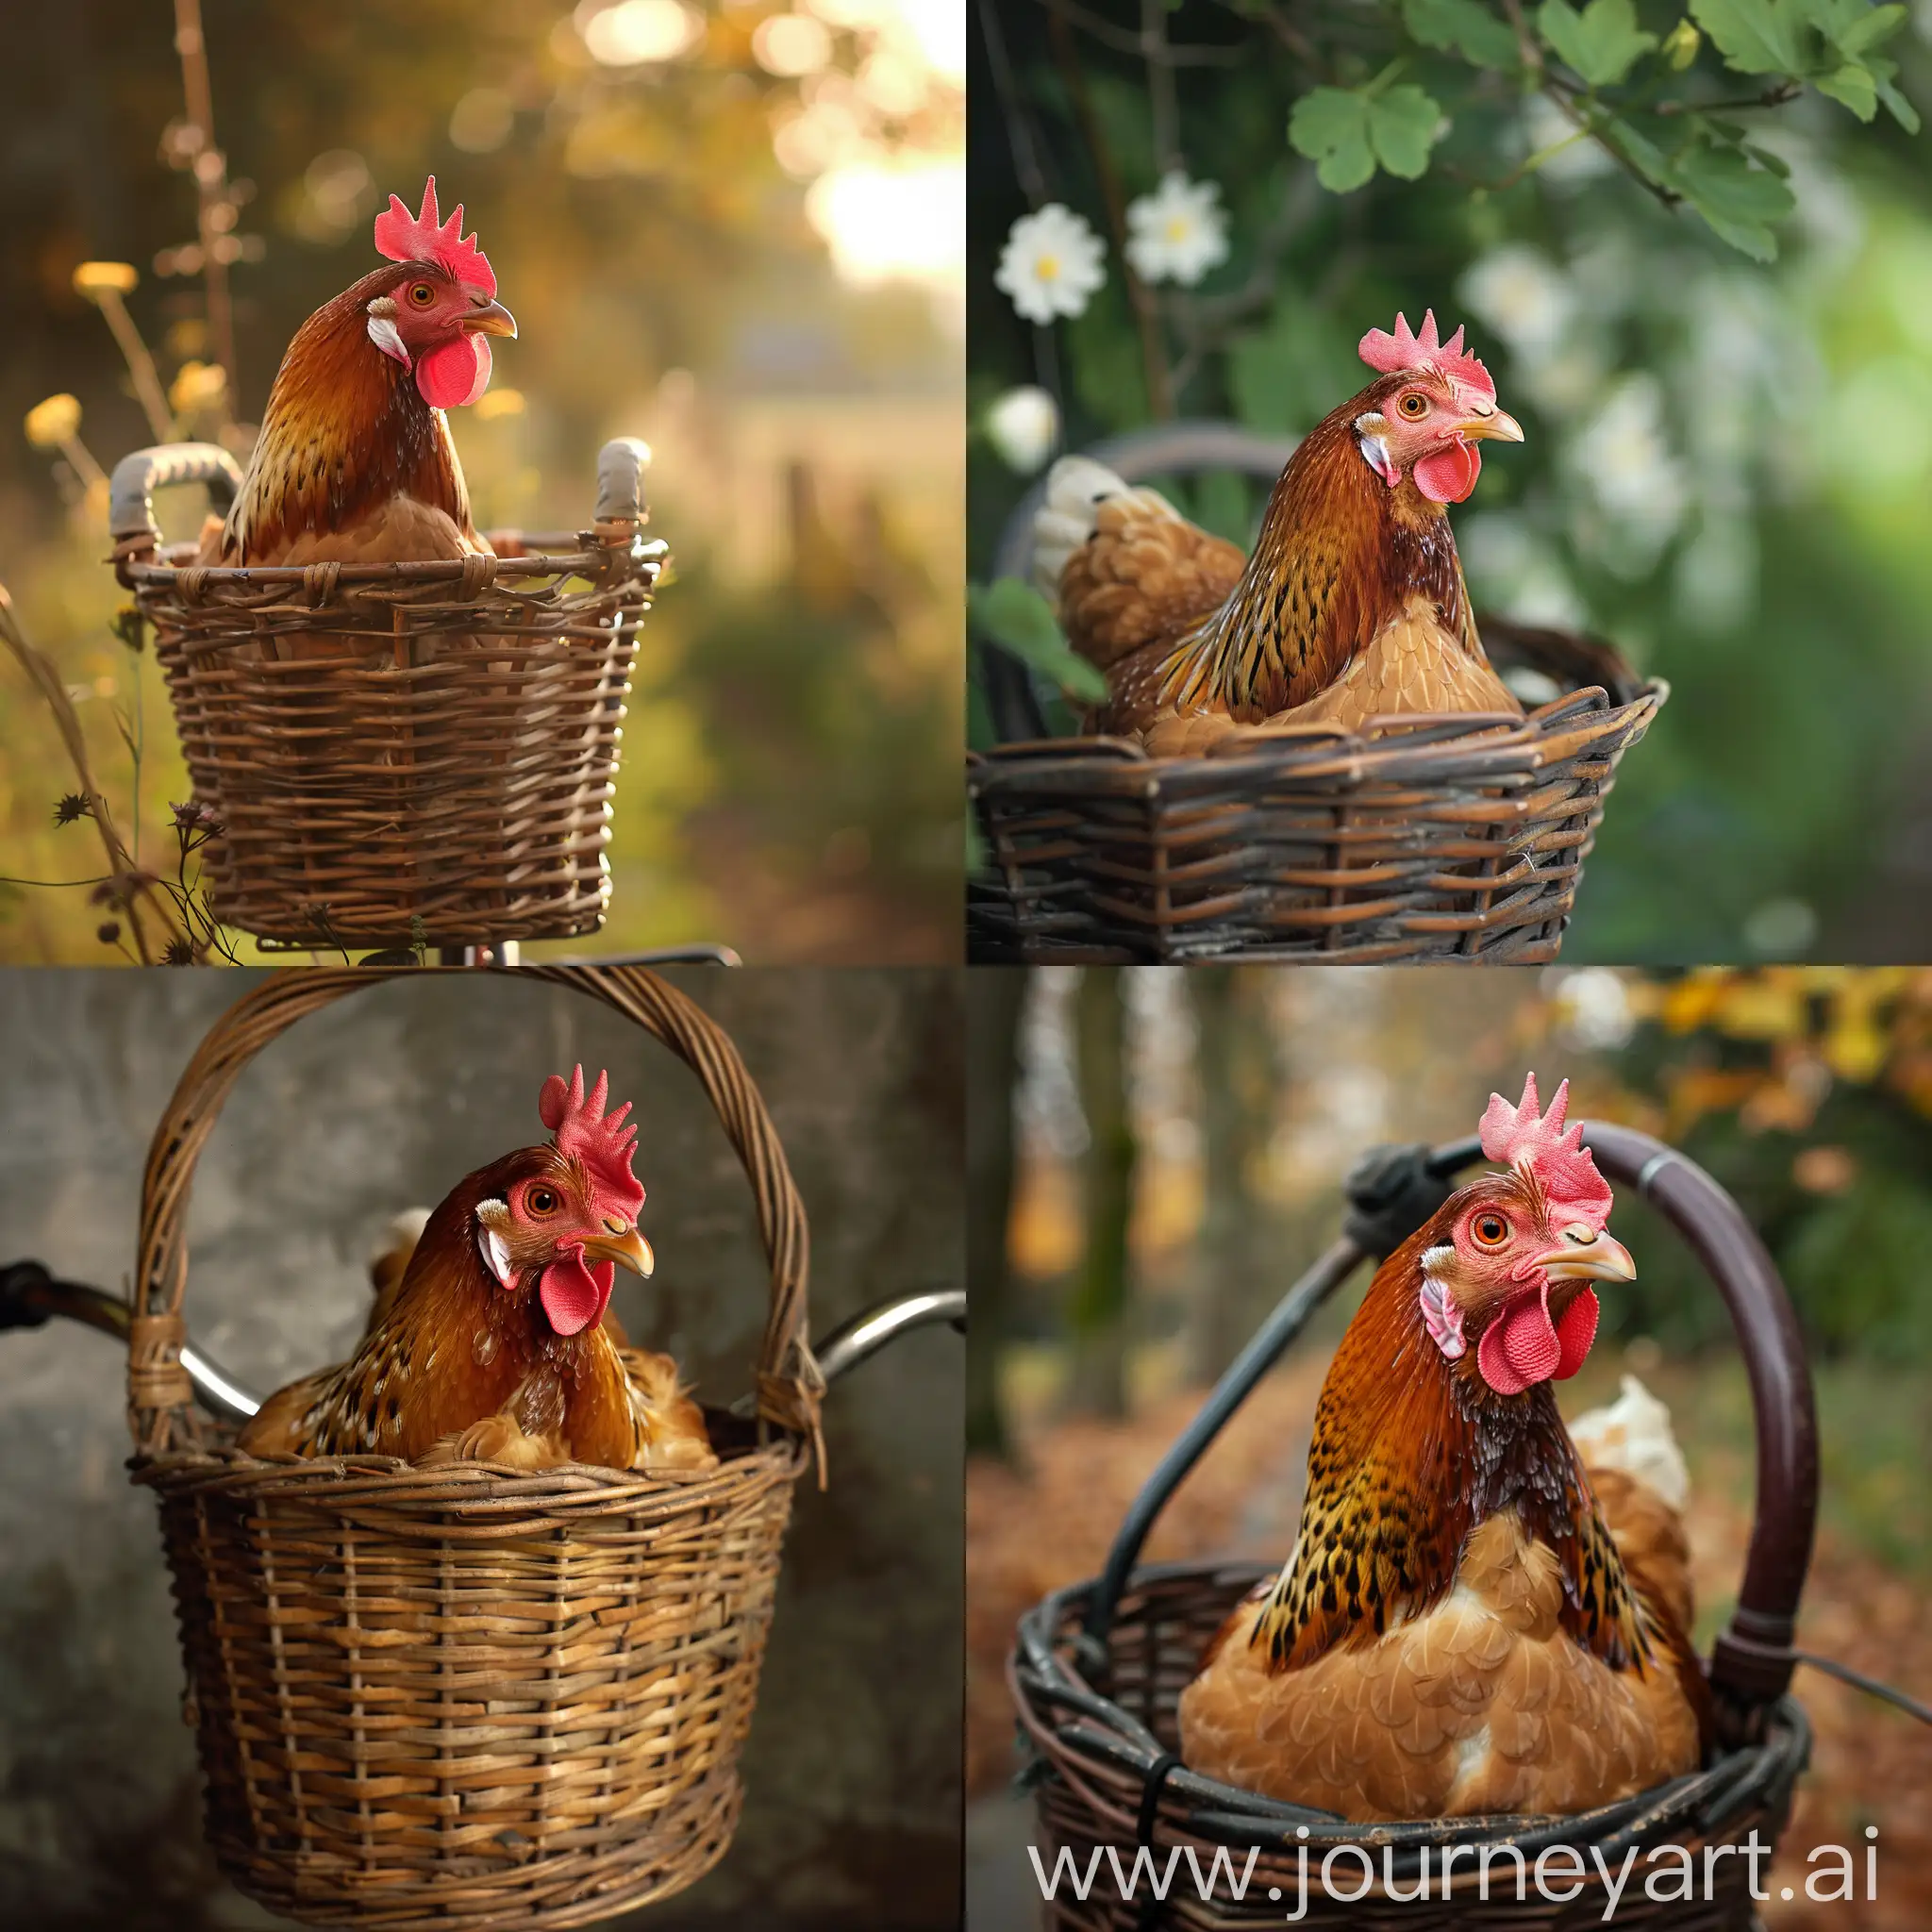 Adorable-Chicken-Nestled-in-Bicycle-Basket